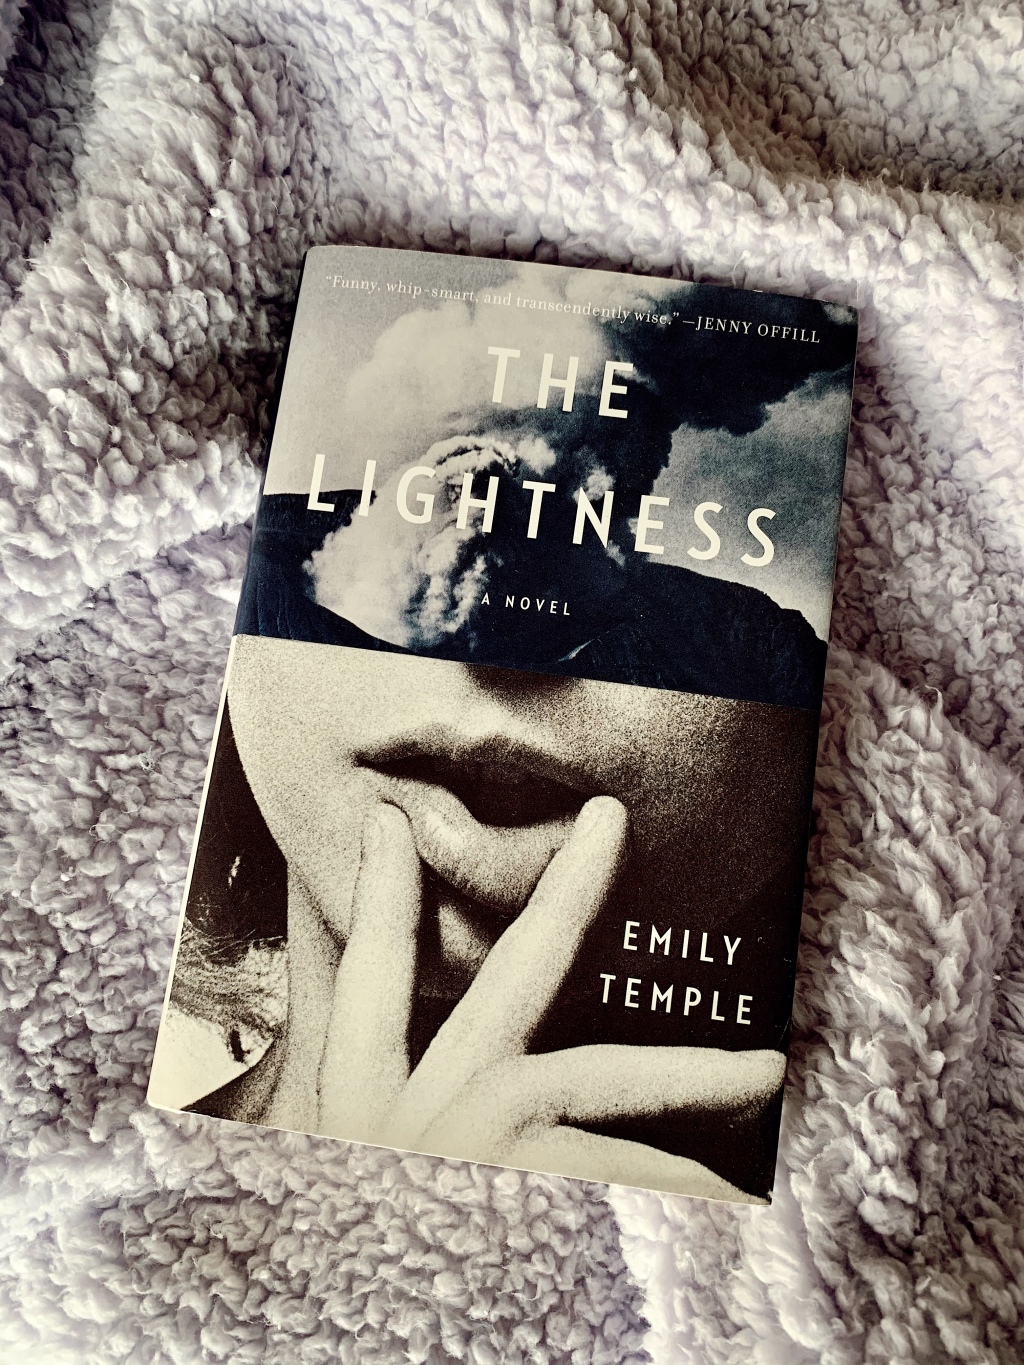 Book Review: The Lightness by Emily Temple